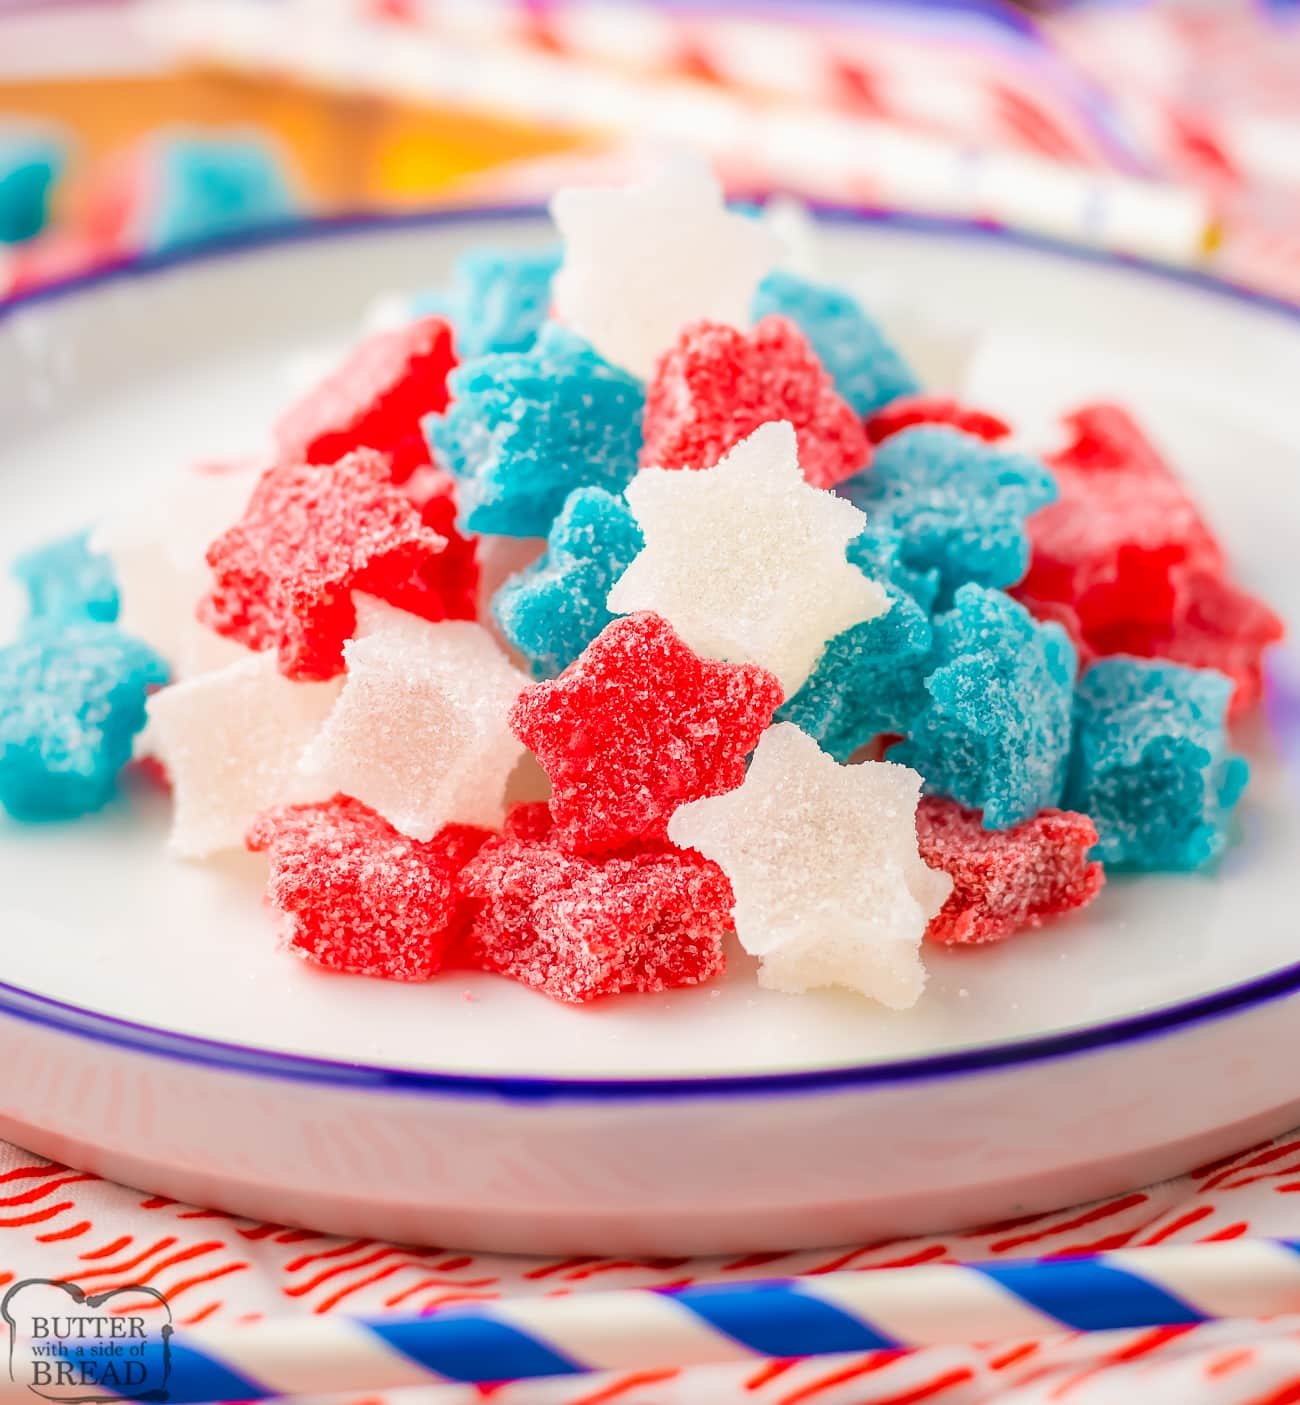 plateful of gumdrop candies in star shapes for 4th of July